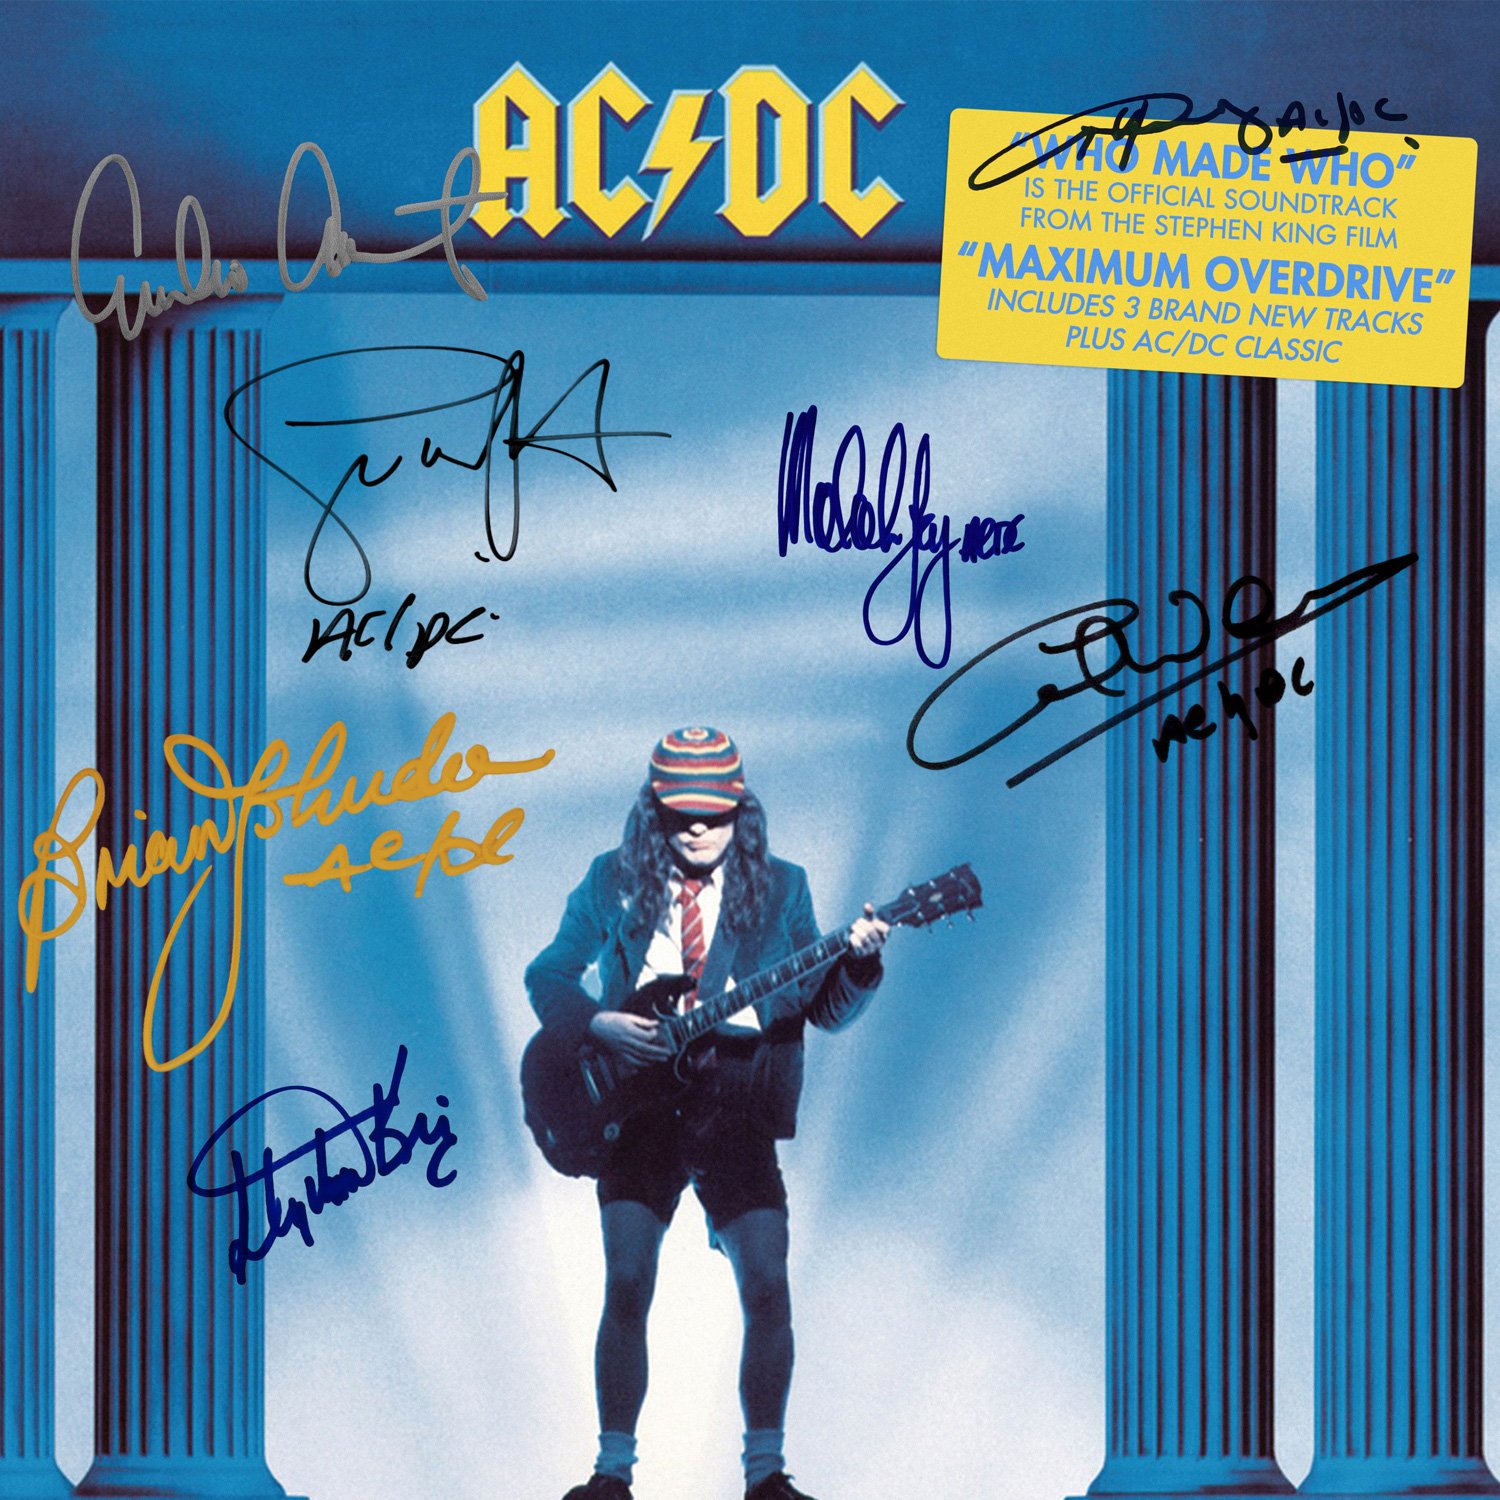 Ac Dc Twivia Acdc Twivia Question 4 4 Ac Dc S Who Made Who Released In 1986 Served As The Official Soundtrack To Stephen King S Film Maximum Overdrive Although The Same Worldwide Name The